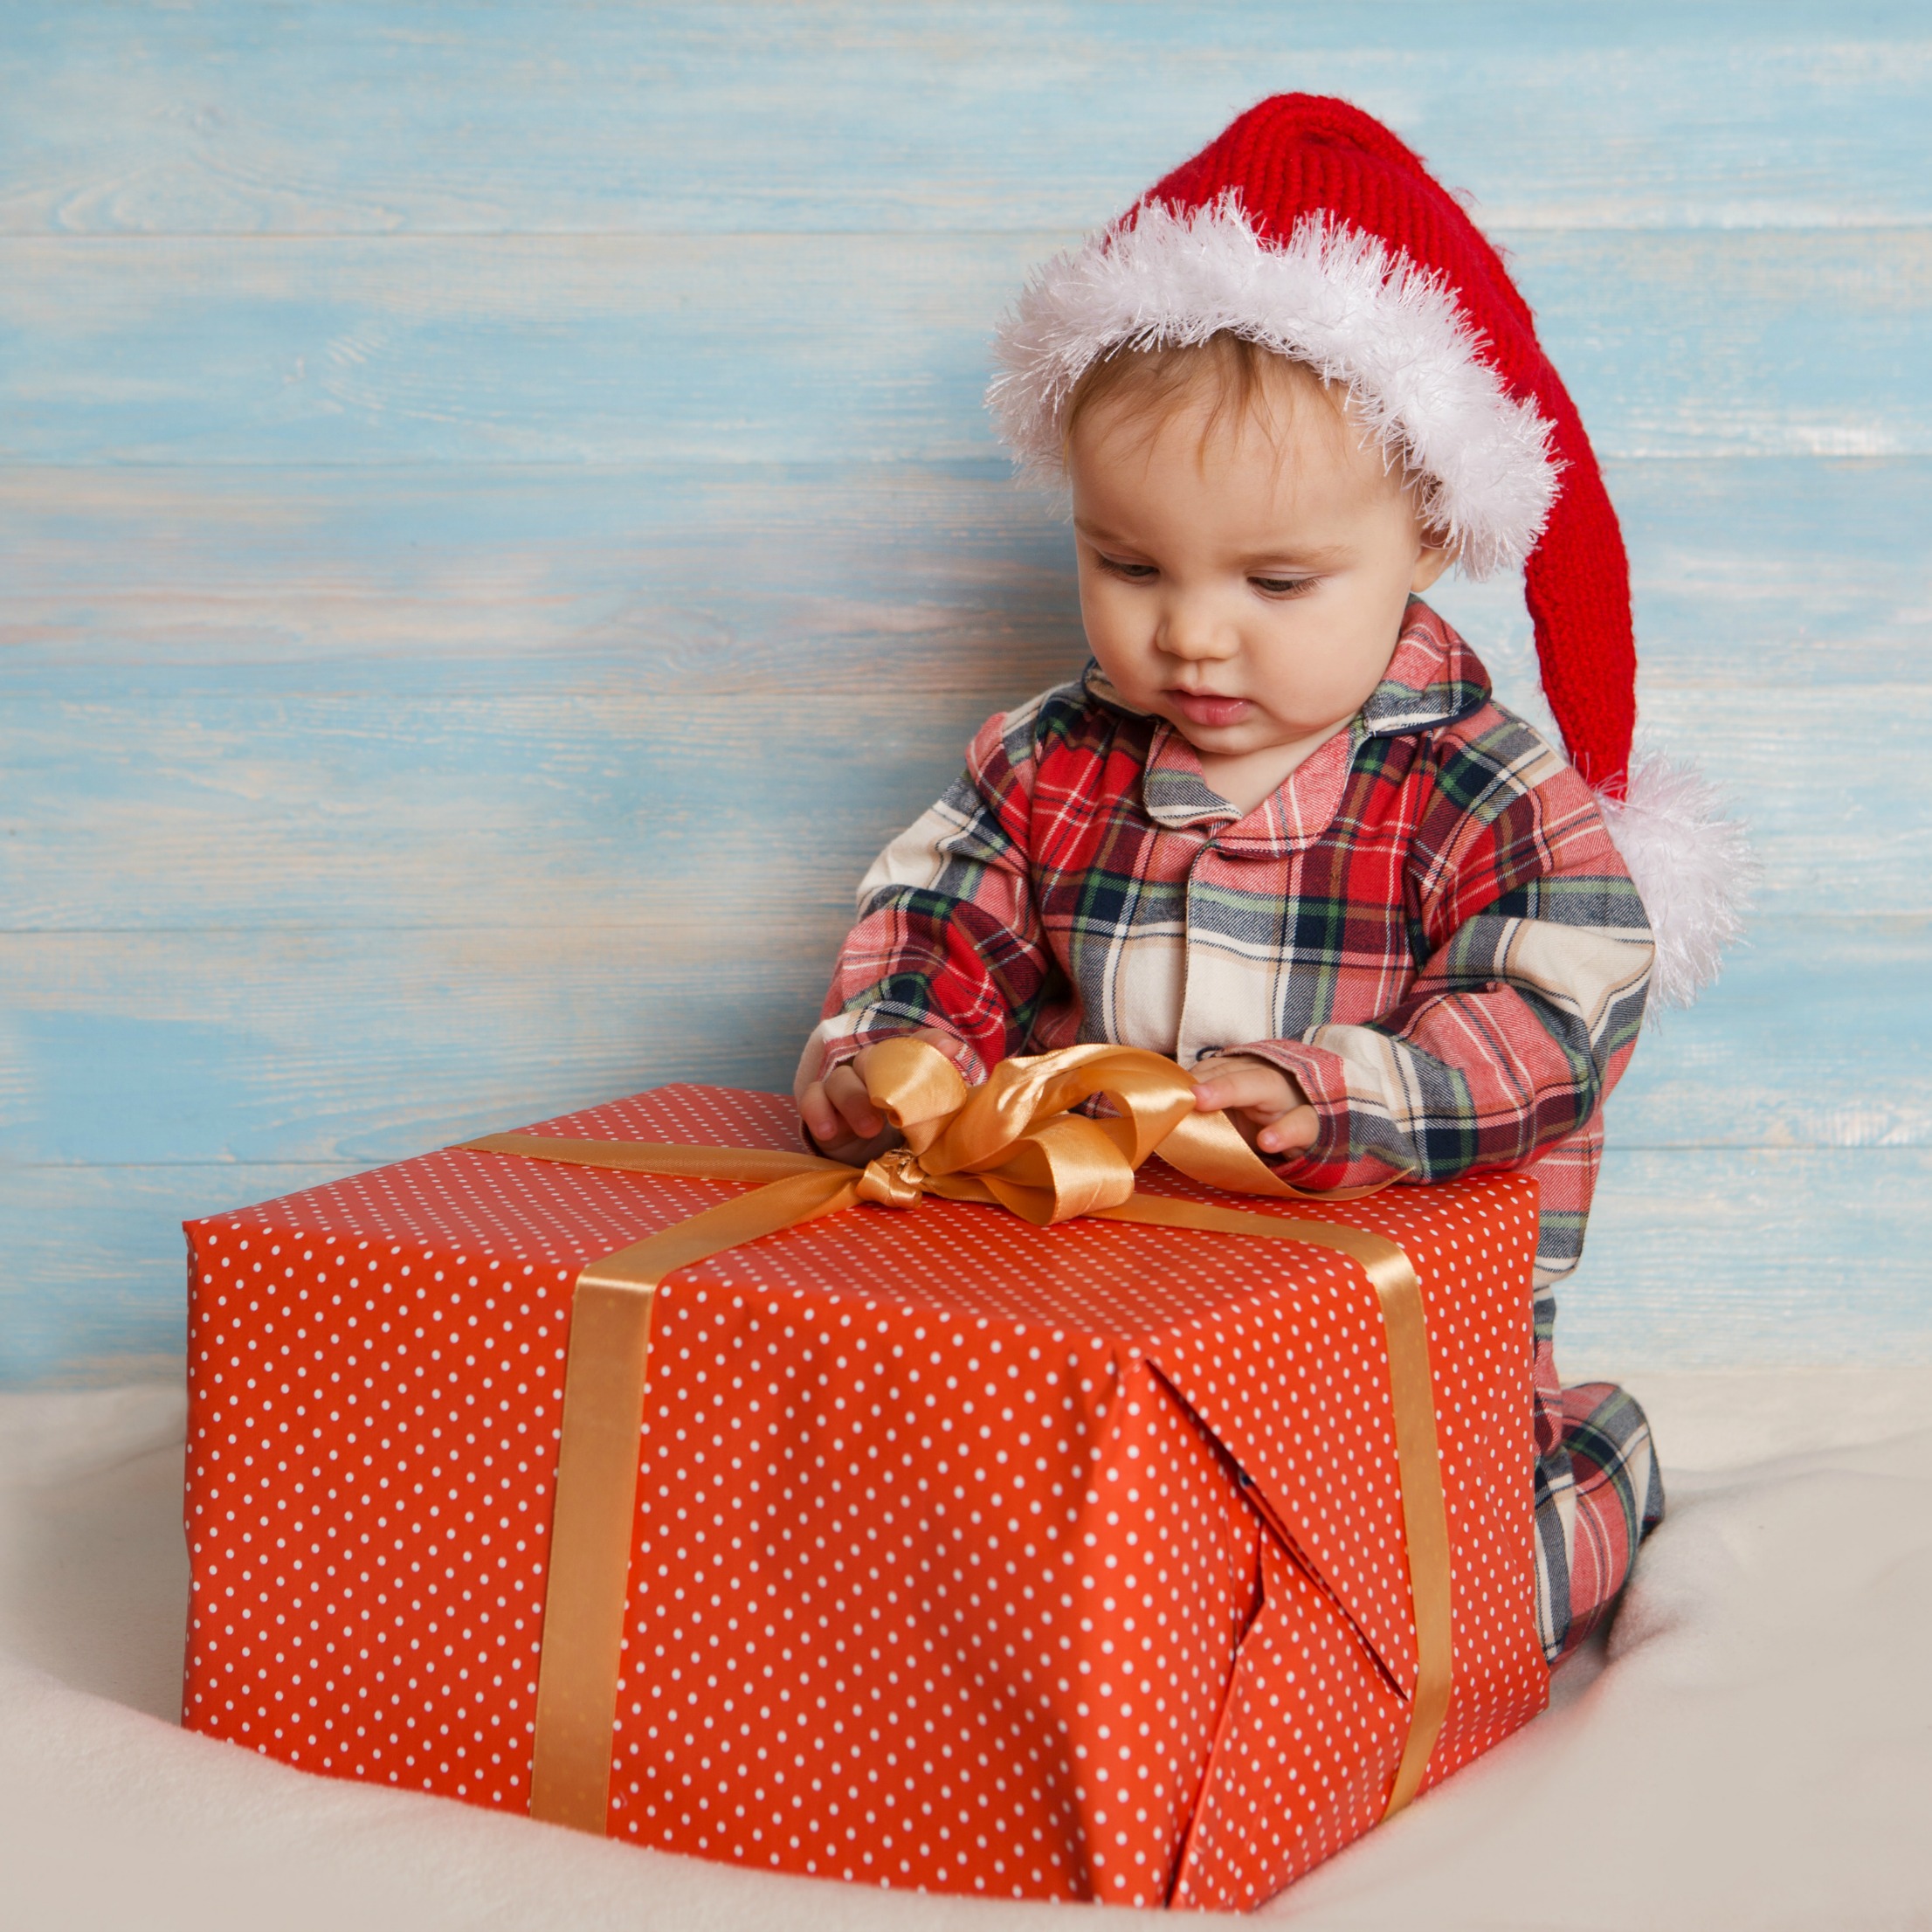 The Ultimate Toddler Gift Idea That Won’t Cost You a Penny